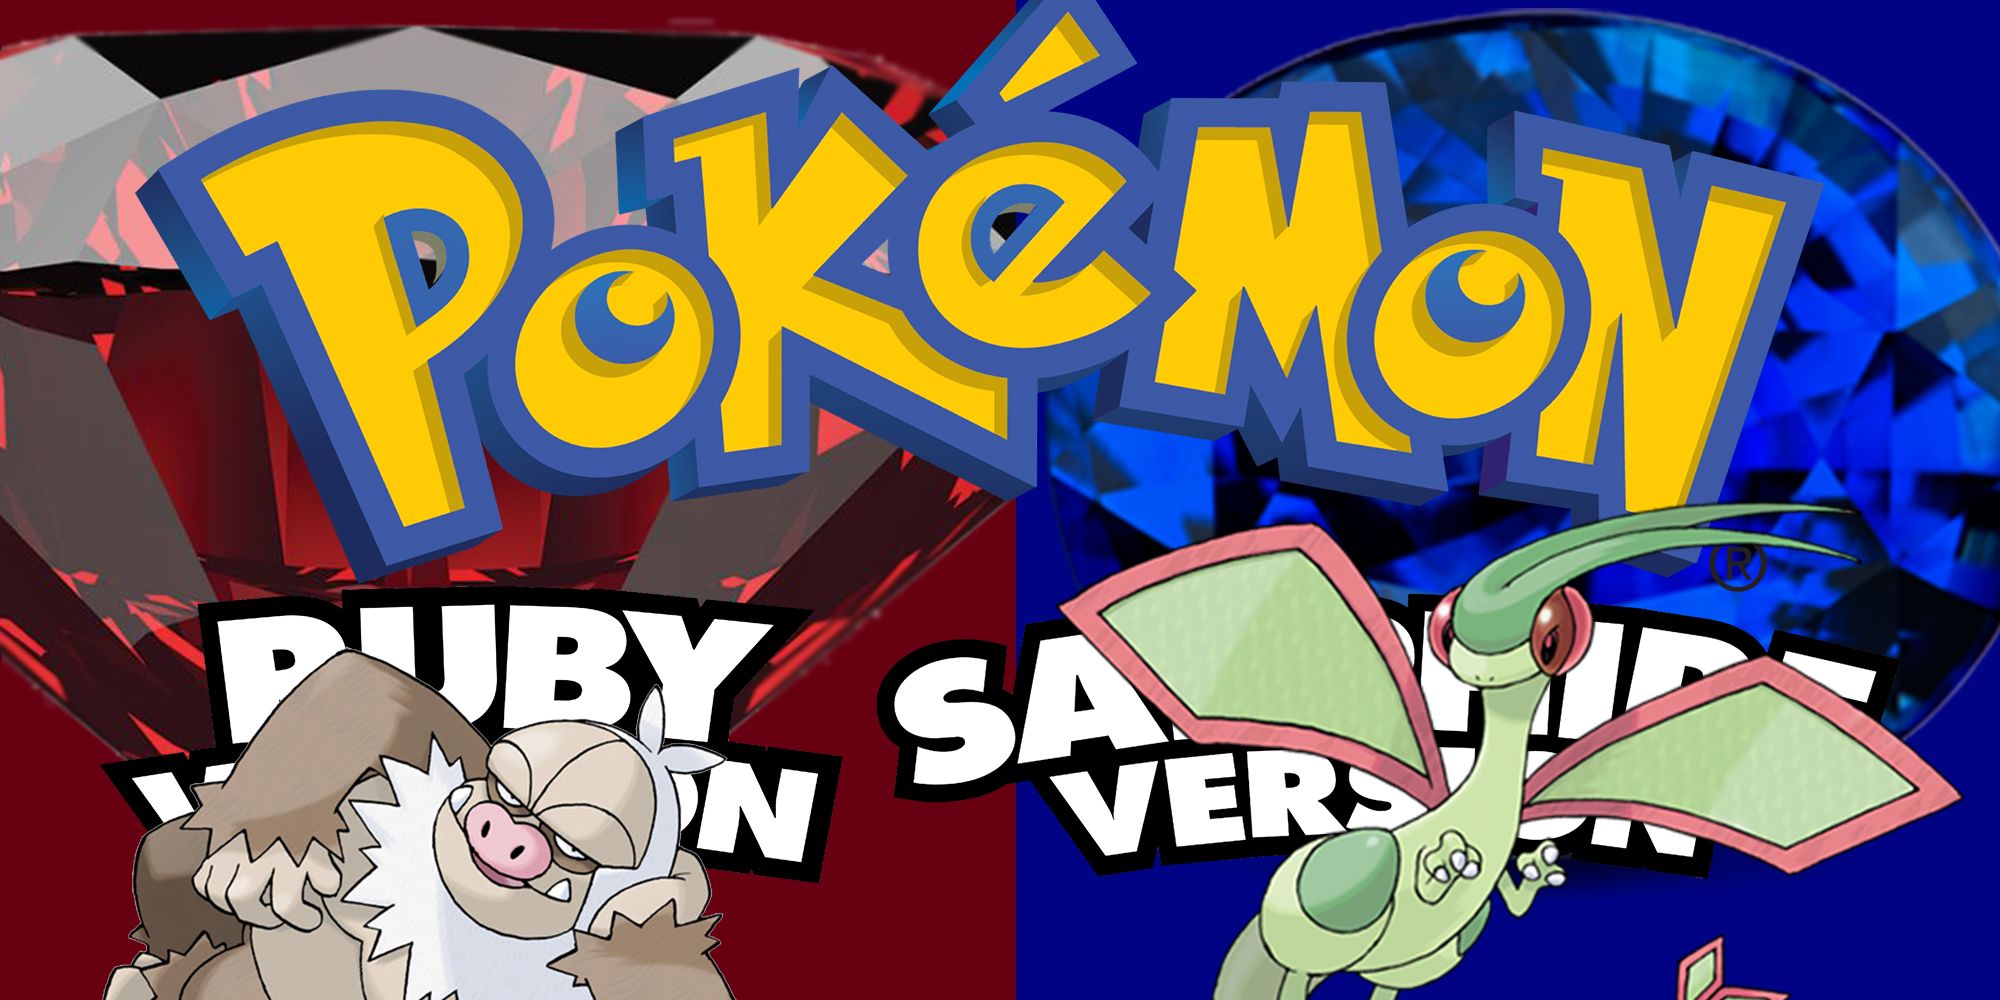 The Strongest Pokemon In The Ruby & Sapphire Games (Based On Stats)